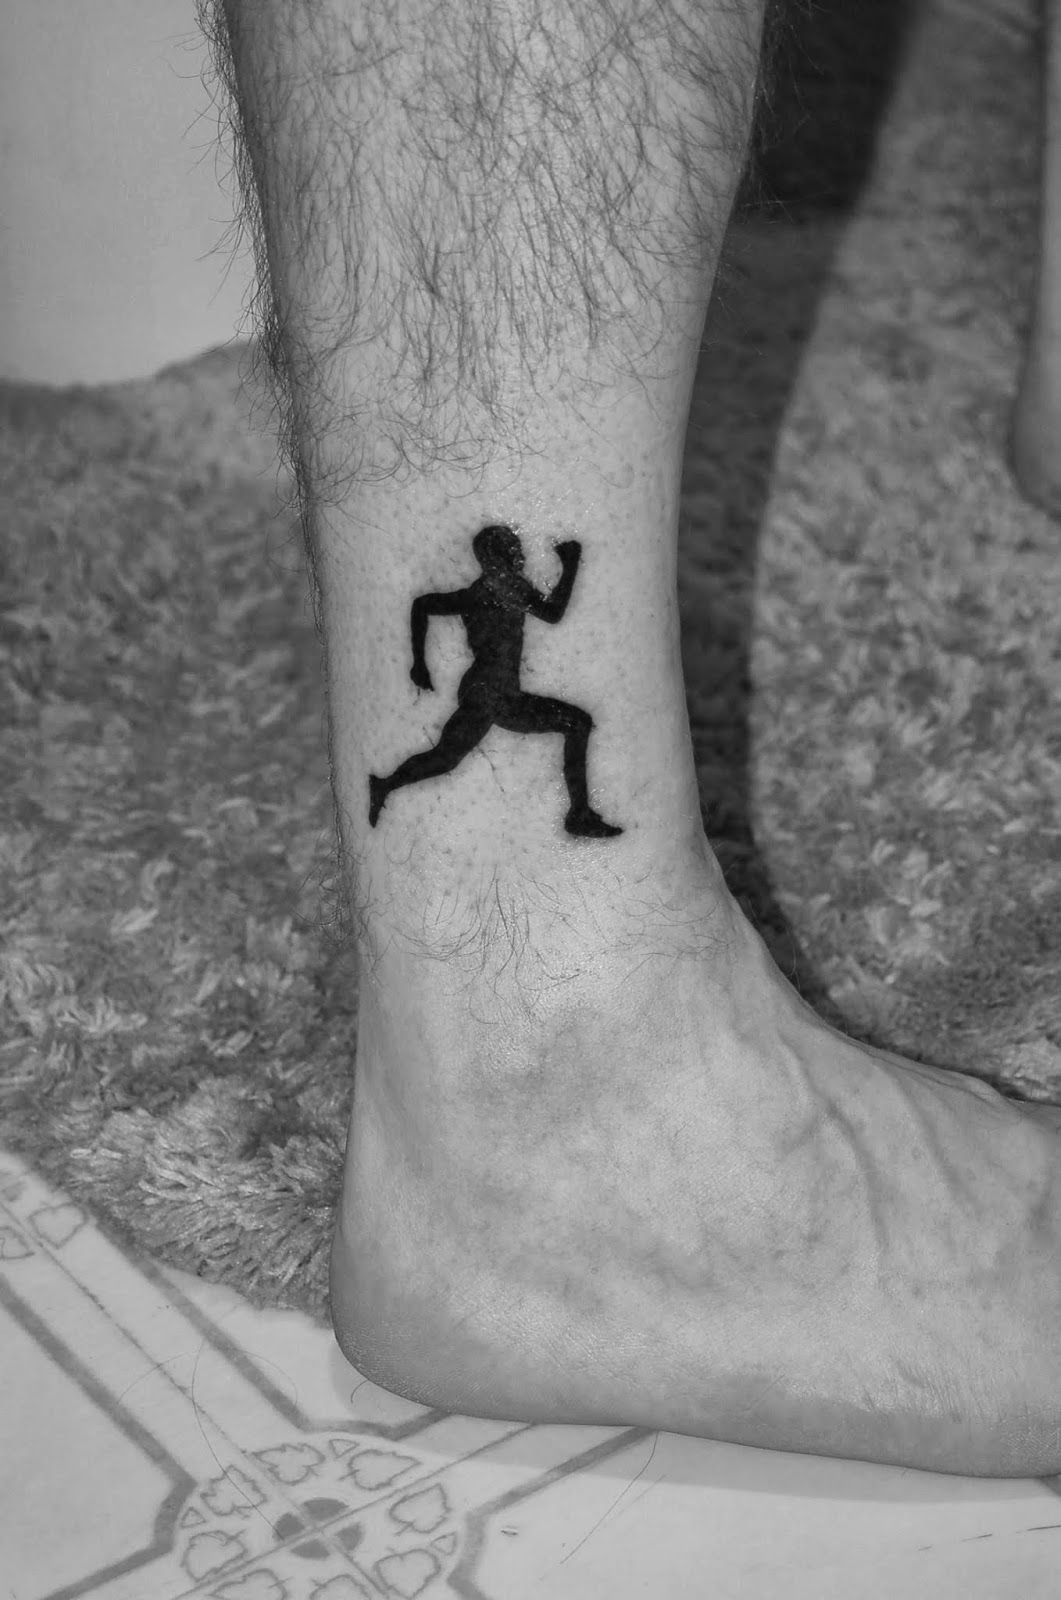 Many St. Jude runners choose tattoos as a permanent reminder of their cause